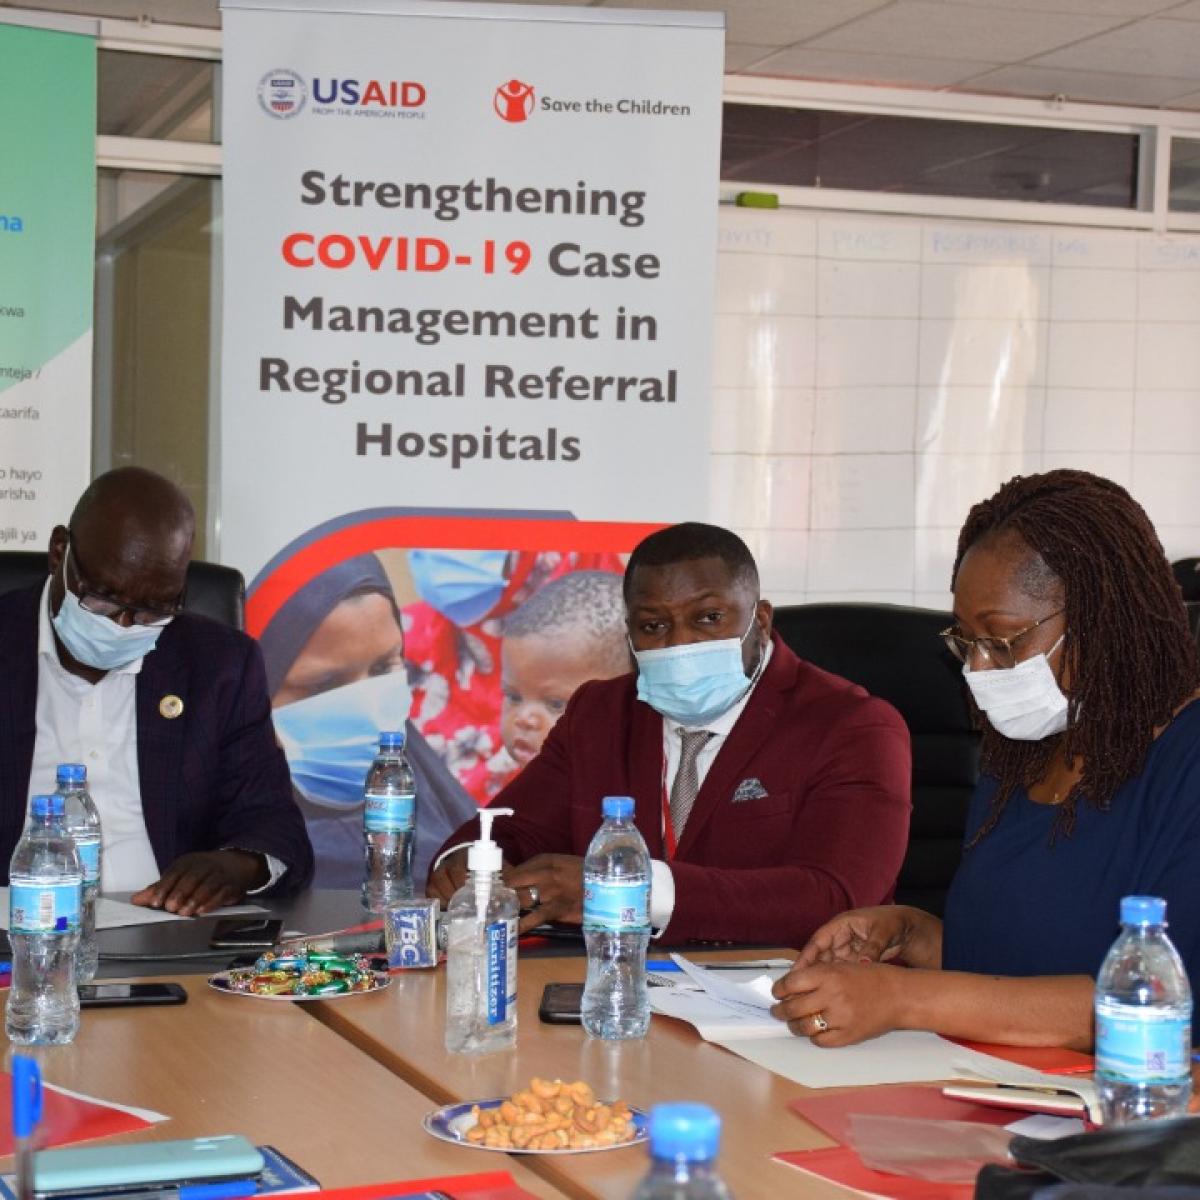 “The COVID-19 pandemic is among the most pressing challenges to the health, well-being, and economic security of all people. We must work together to address this pandemic with urgency.” USAID Project Management Specialist Dr. Miriam Kombe